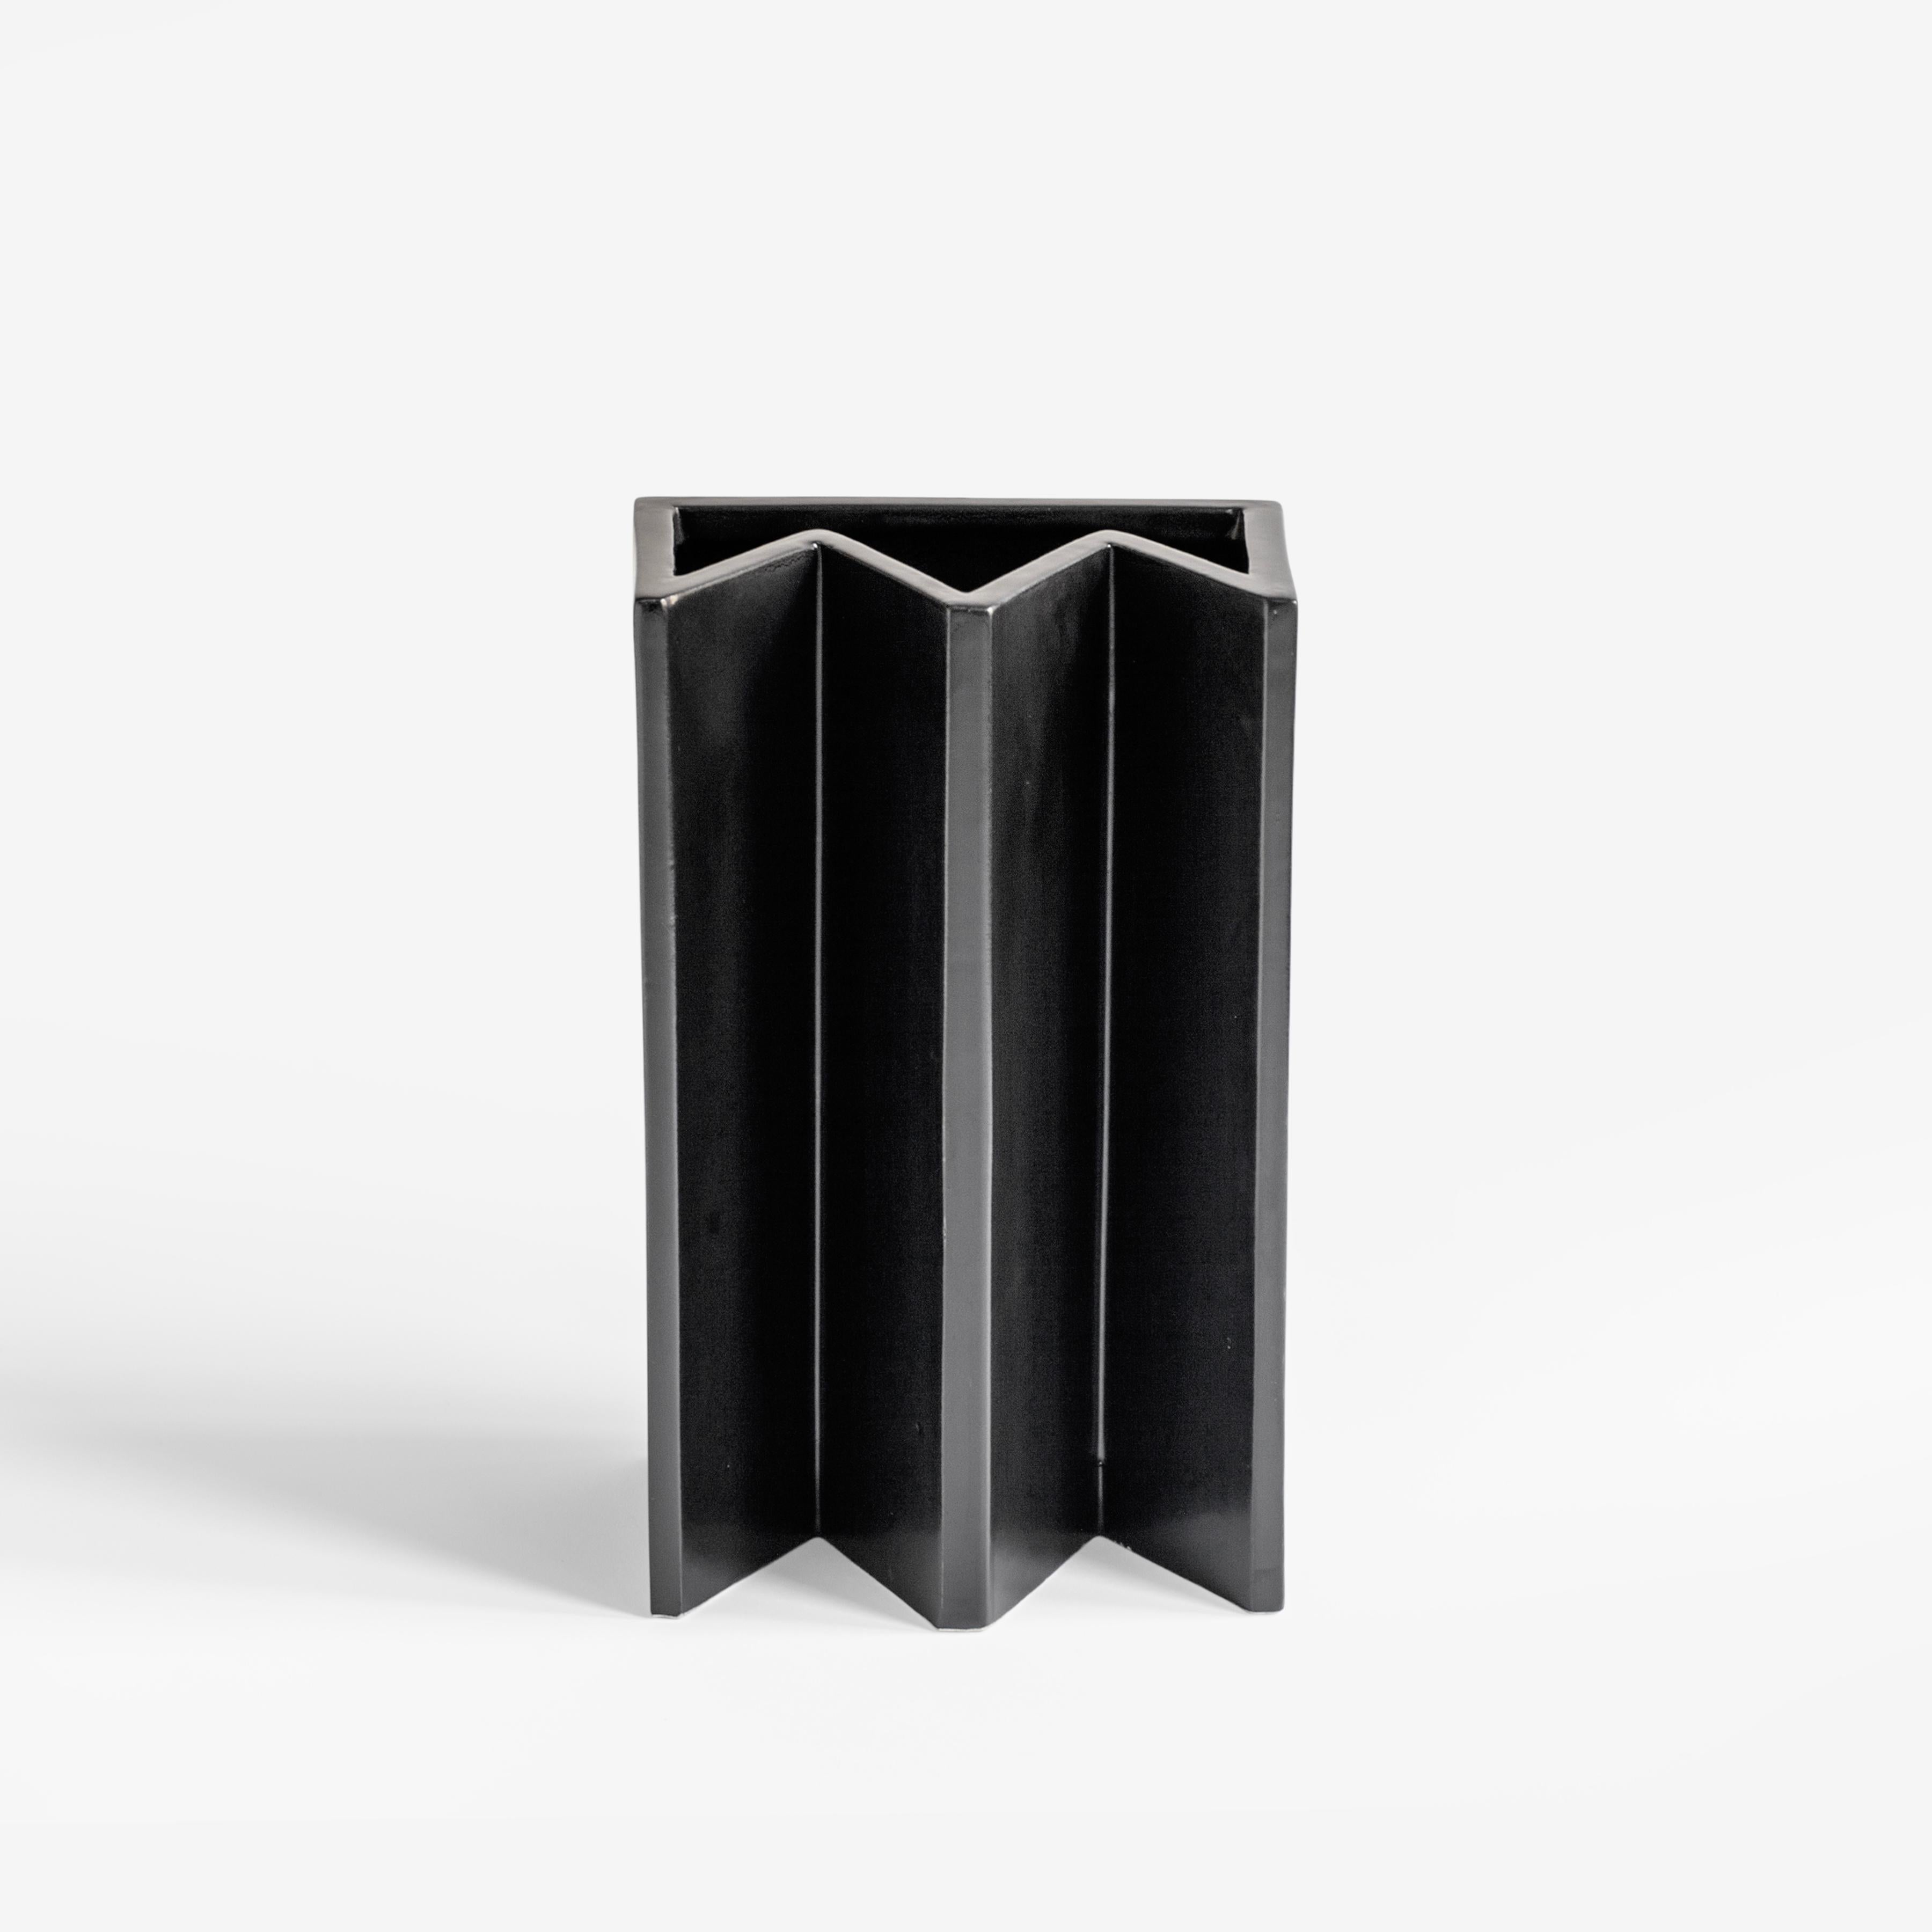 A minimalist and playful vase in slip-cast ceramic with a black matt glaze, the piece is handmade in Milan.
Part of the 